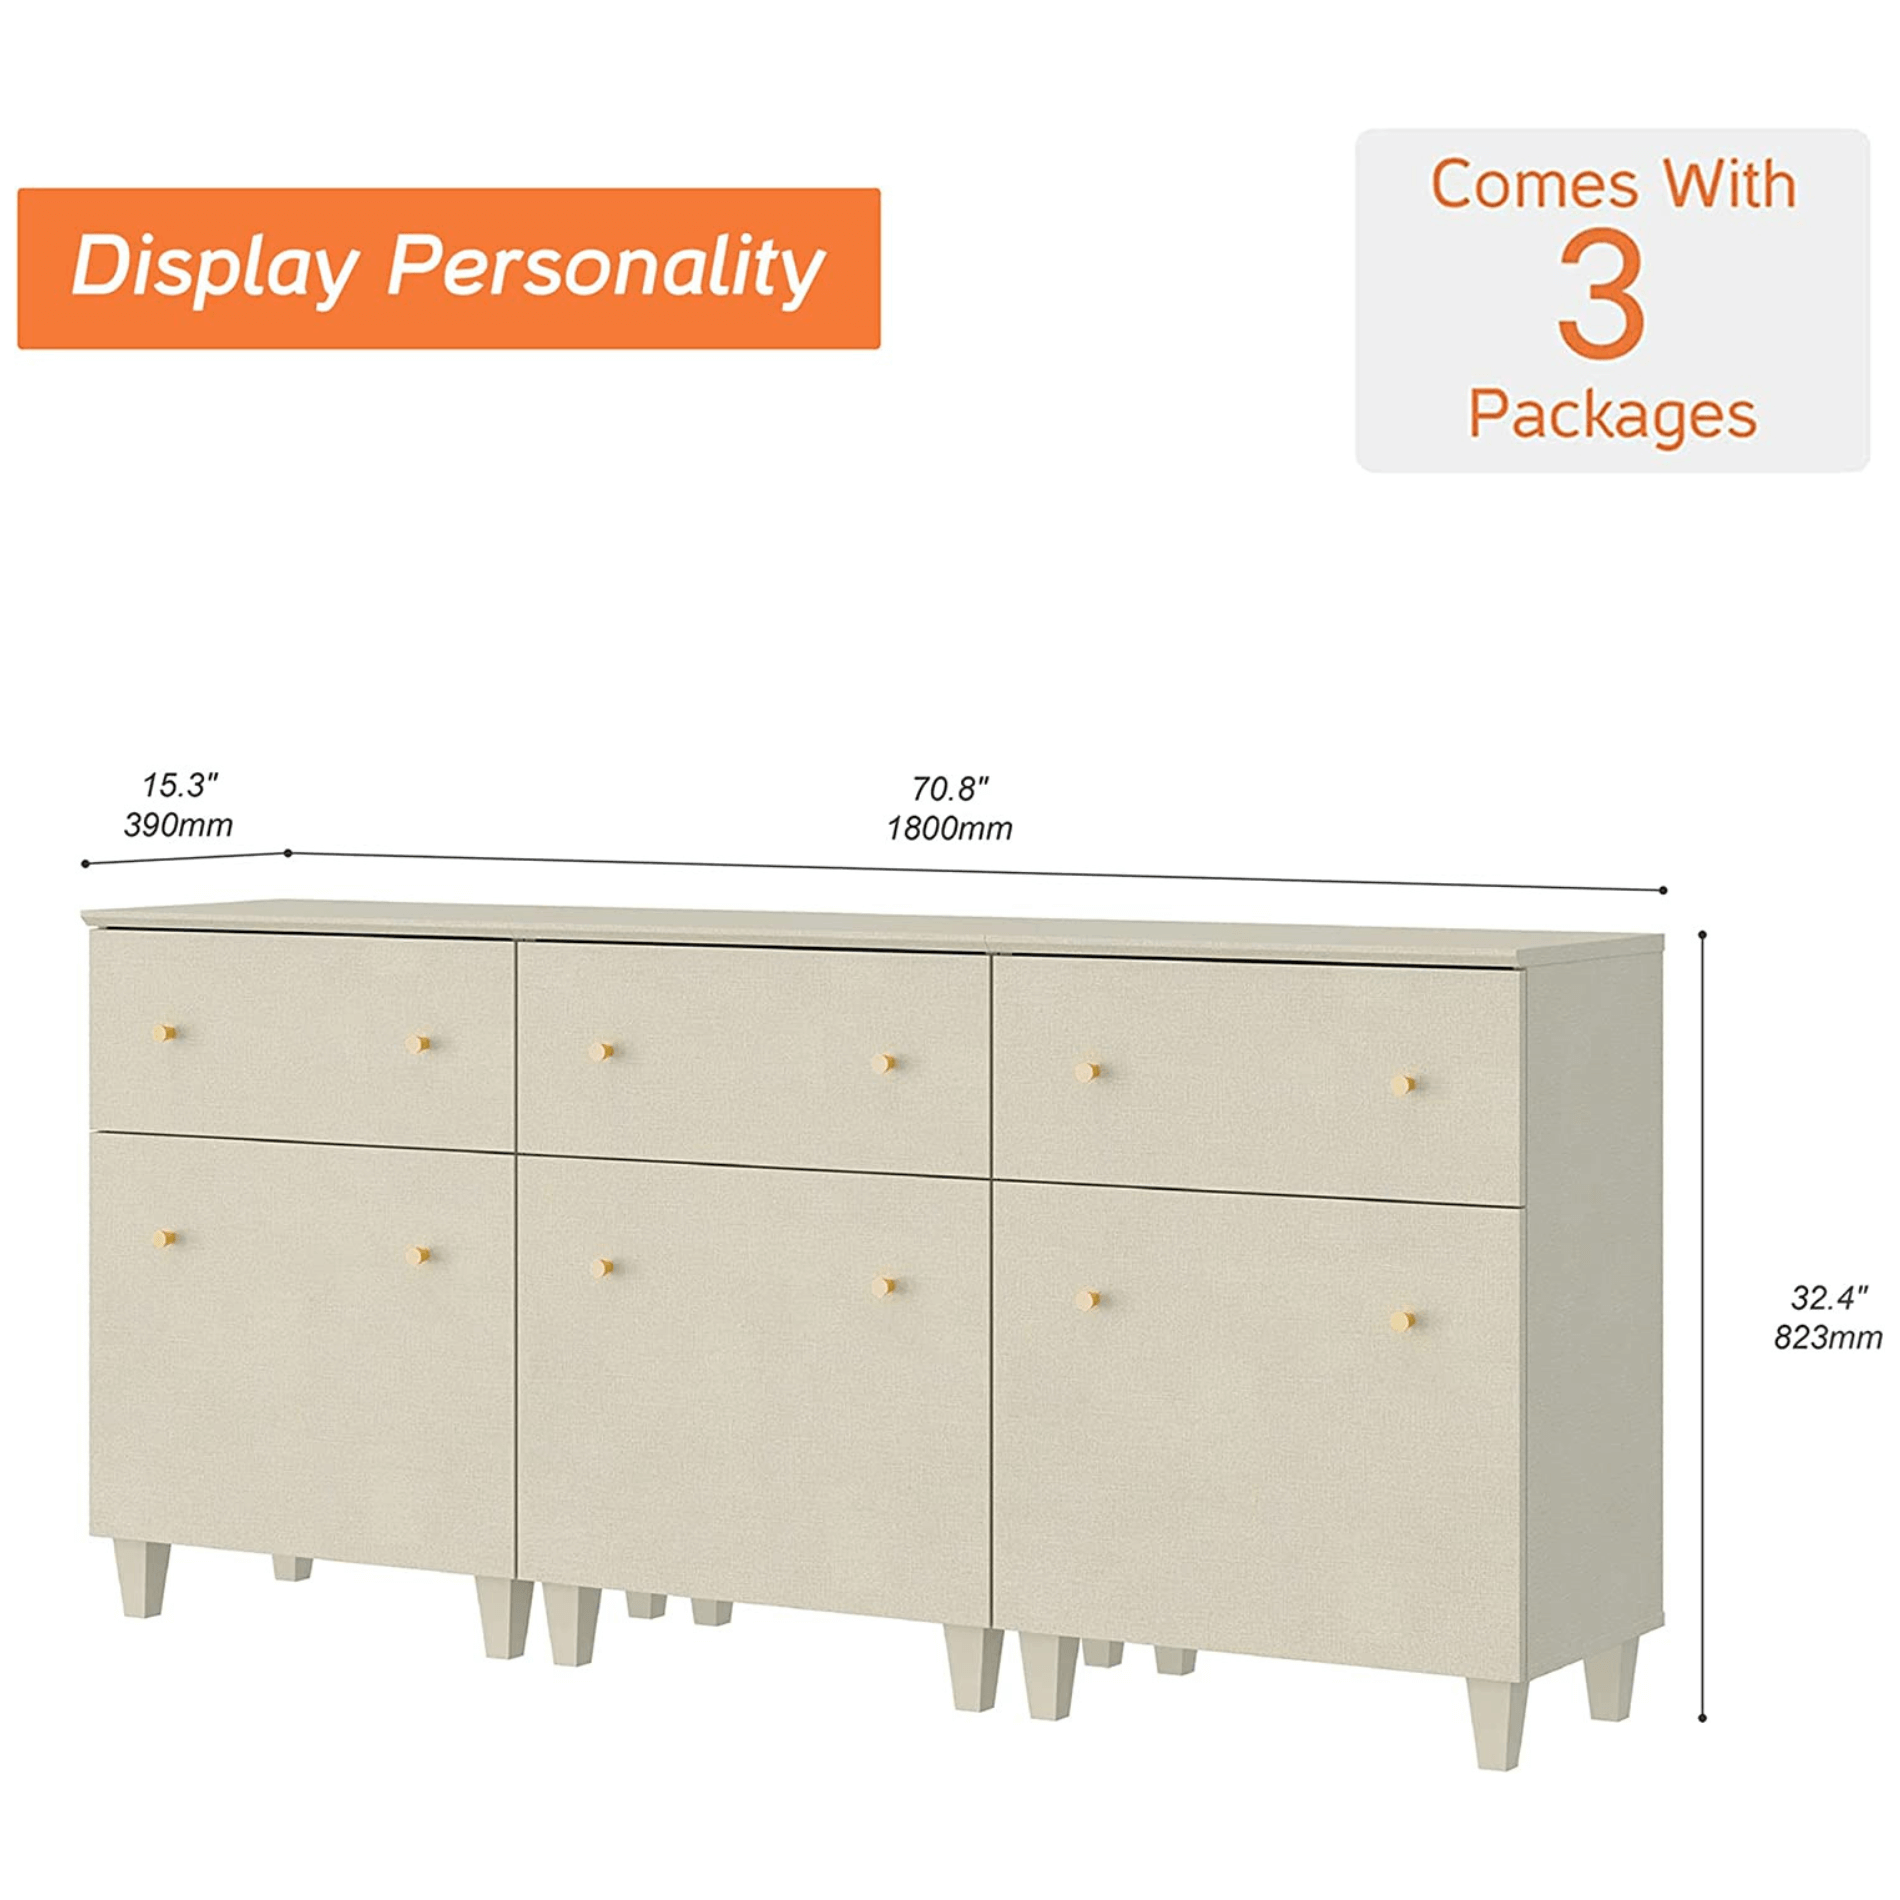 WAMPAT 94.4" Storage Cabinets for Living Room, 4-in-1 Kitchen Sideboards with Drawers and Doors, Beige Accent Cabinets for Hallway, 4 Packs